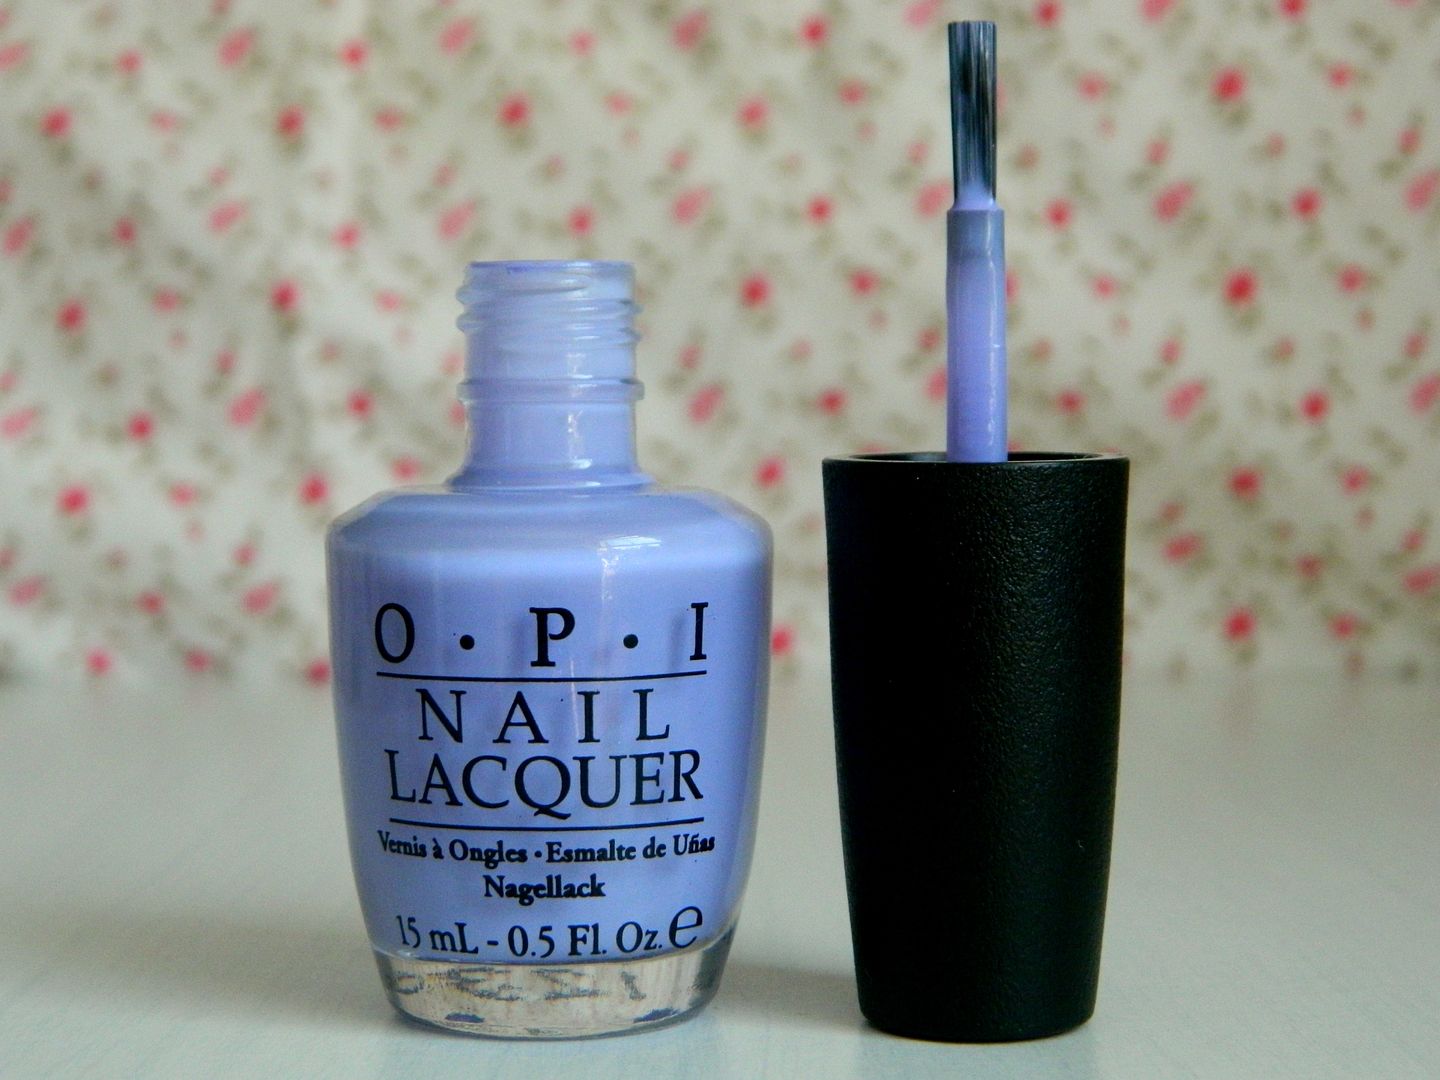 Nails Of The Day OPI Nail Lacquer You're Such A Budapest Brush Belle-amie UK Beauty Fashion Lifestyle Blog